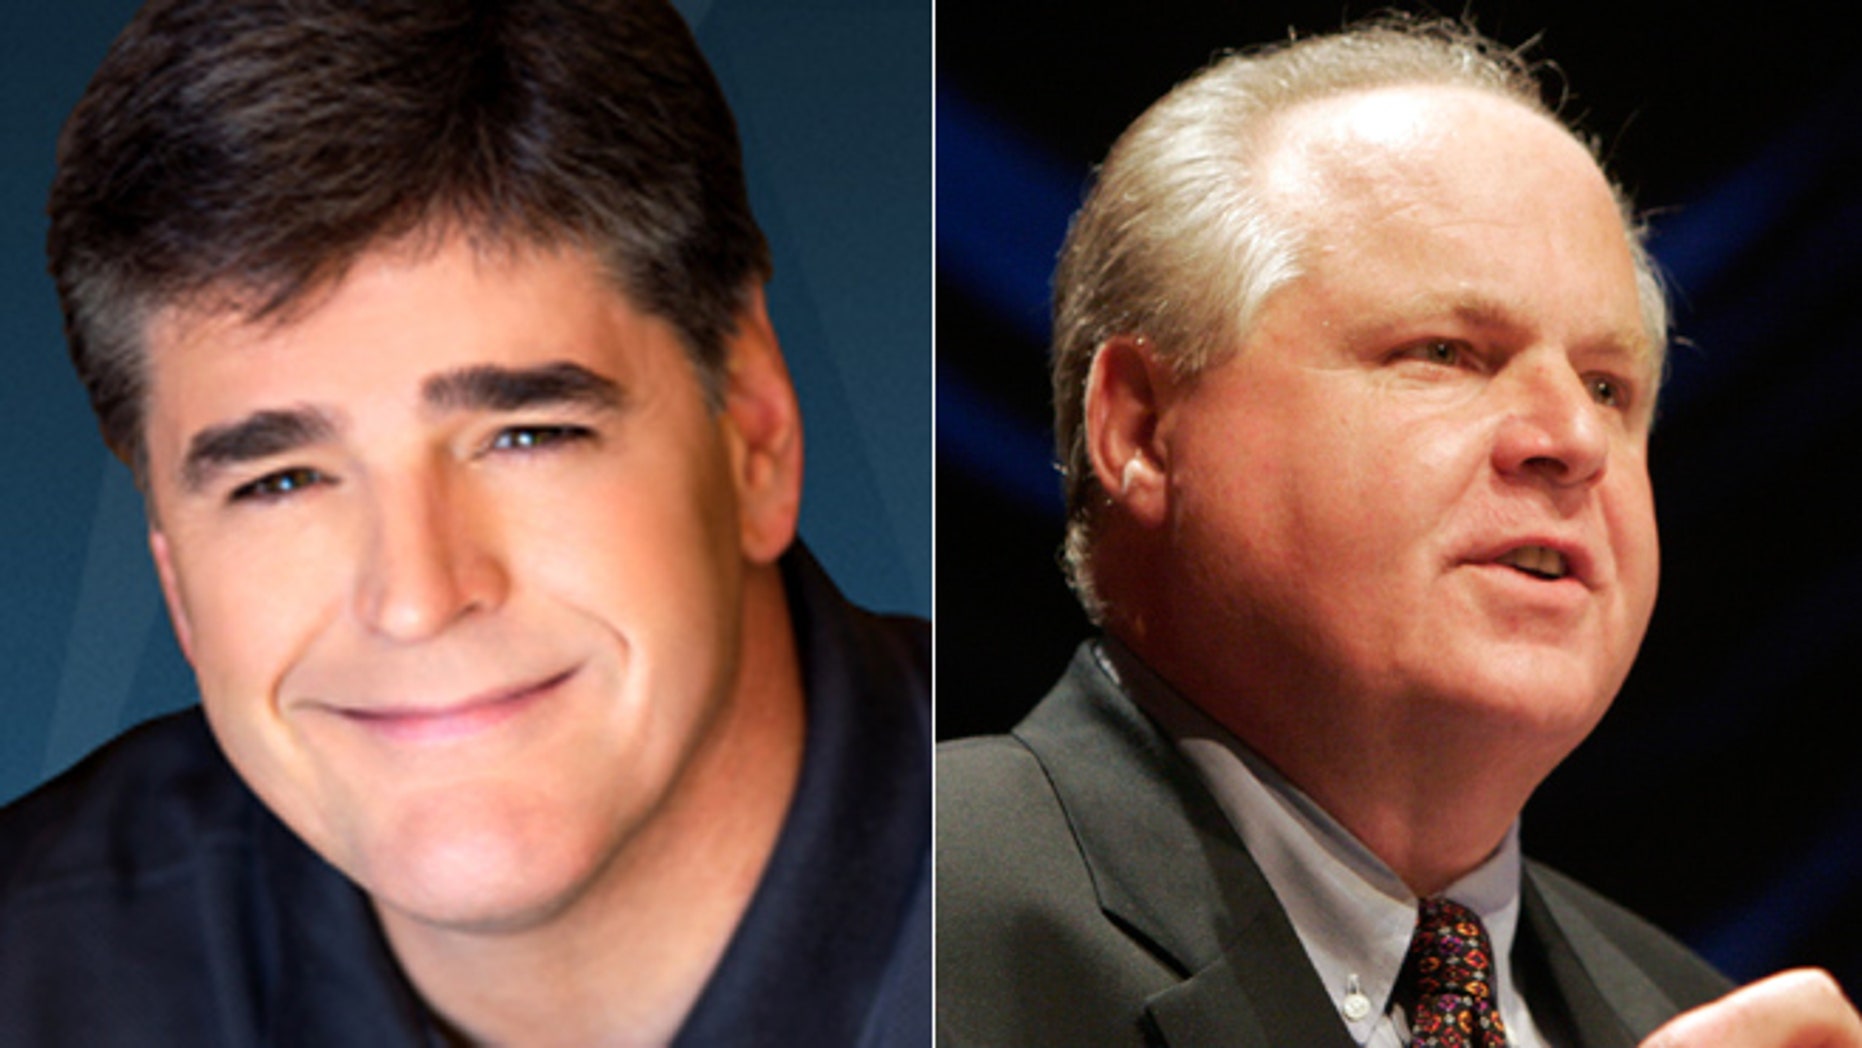 Report: Sean Hannity, Rush Limbaugh could be moving radio homes | Fox News